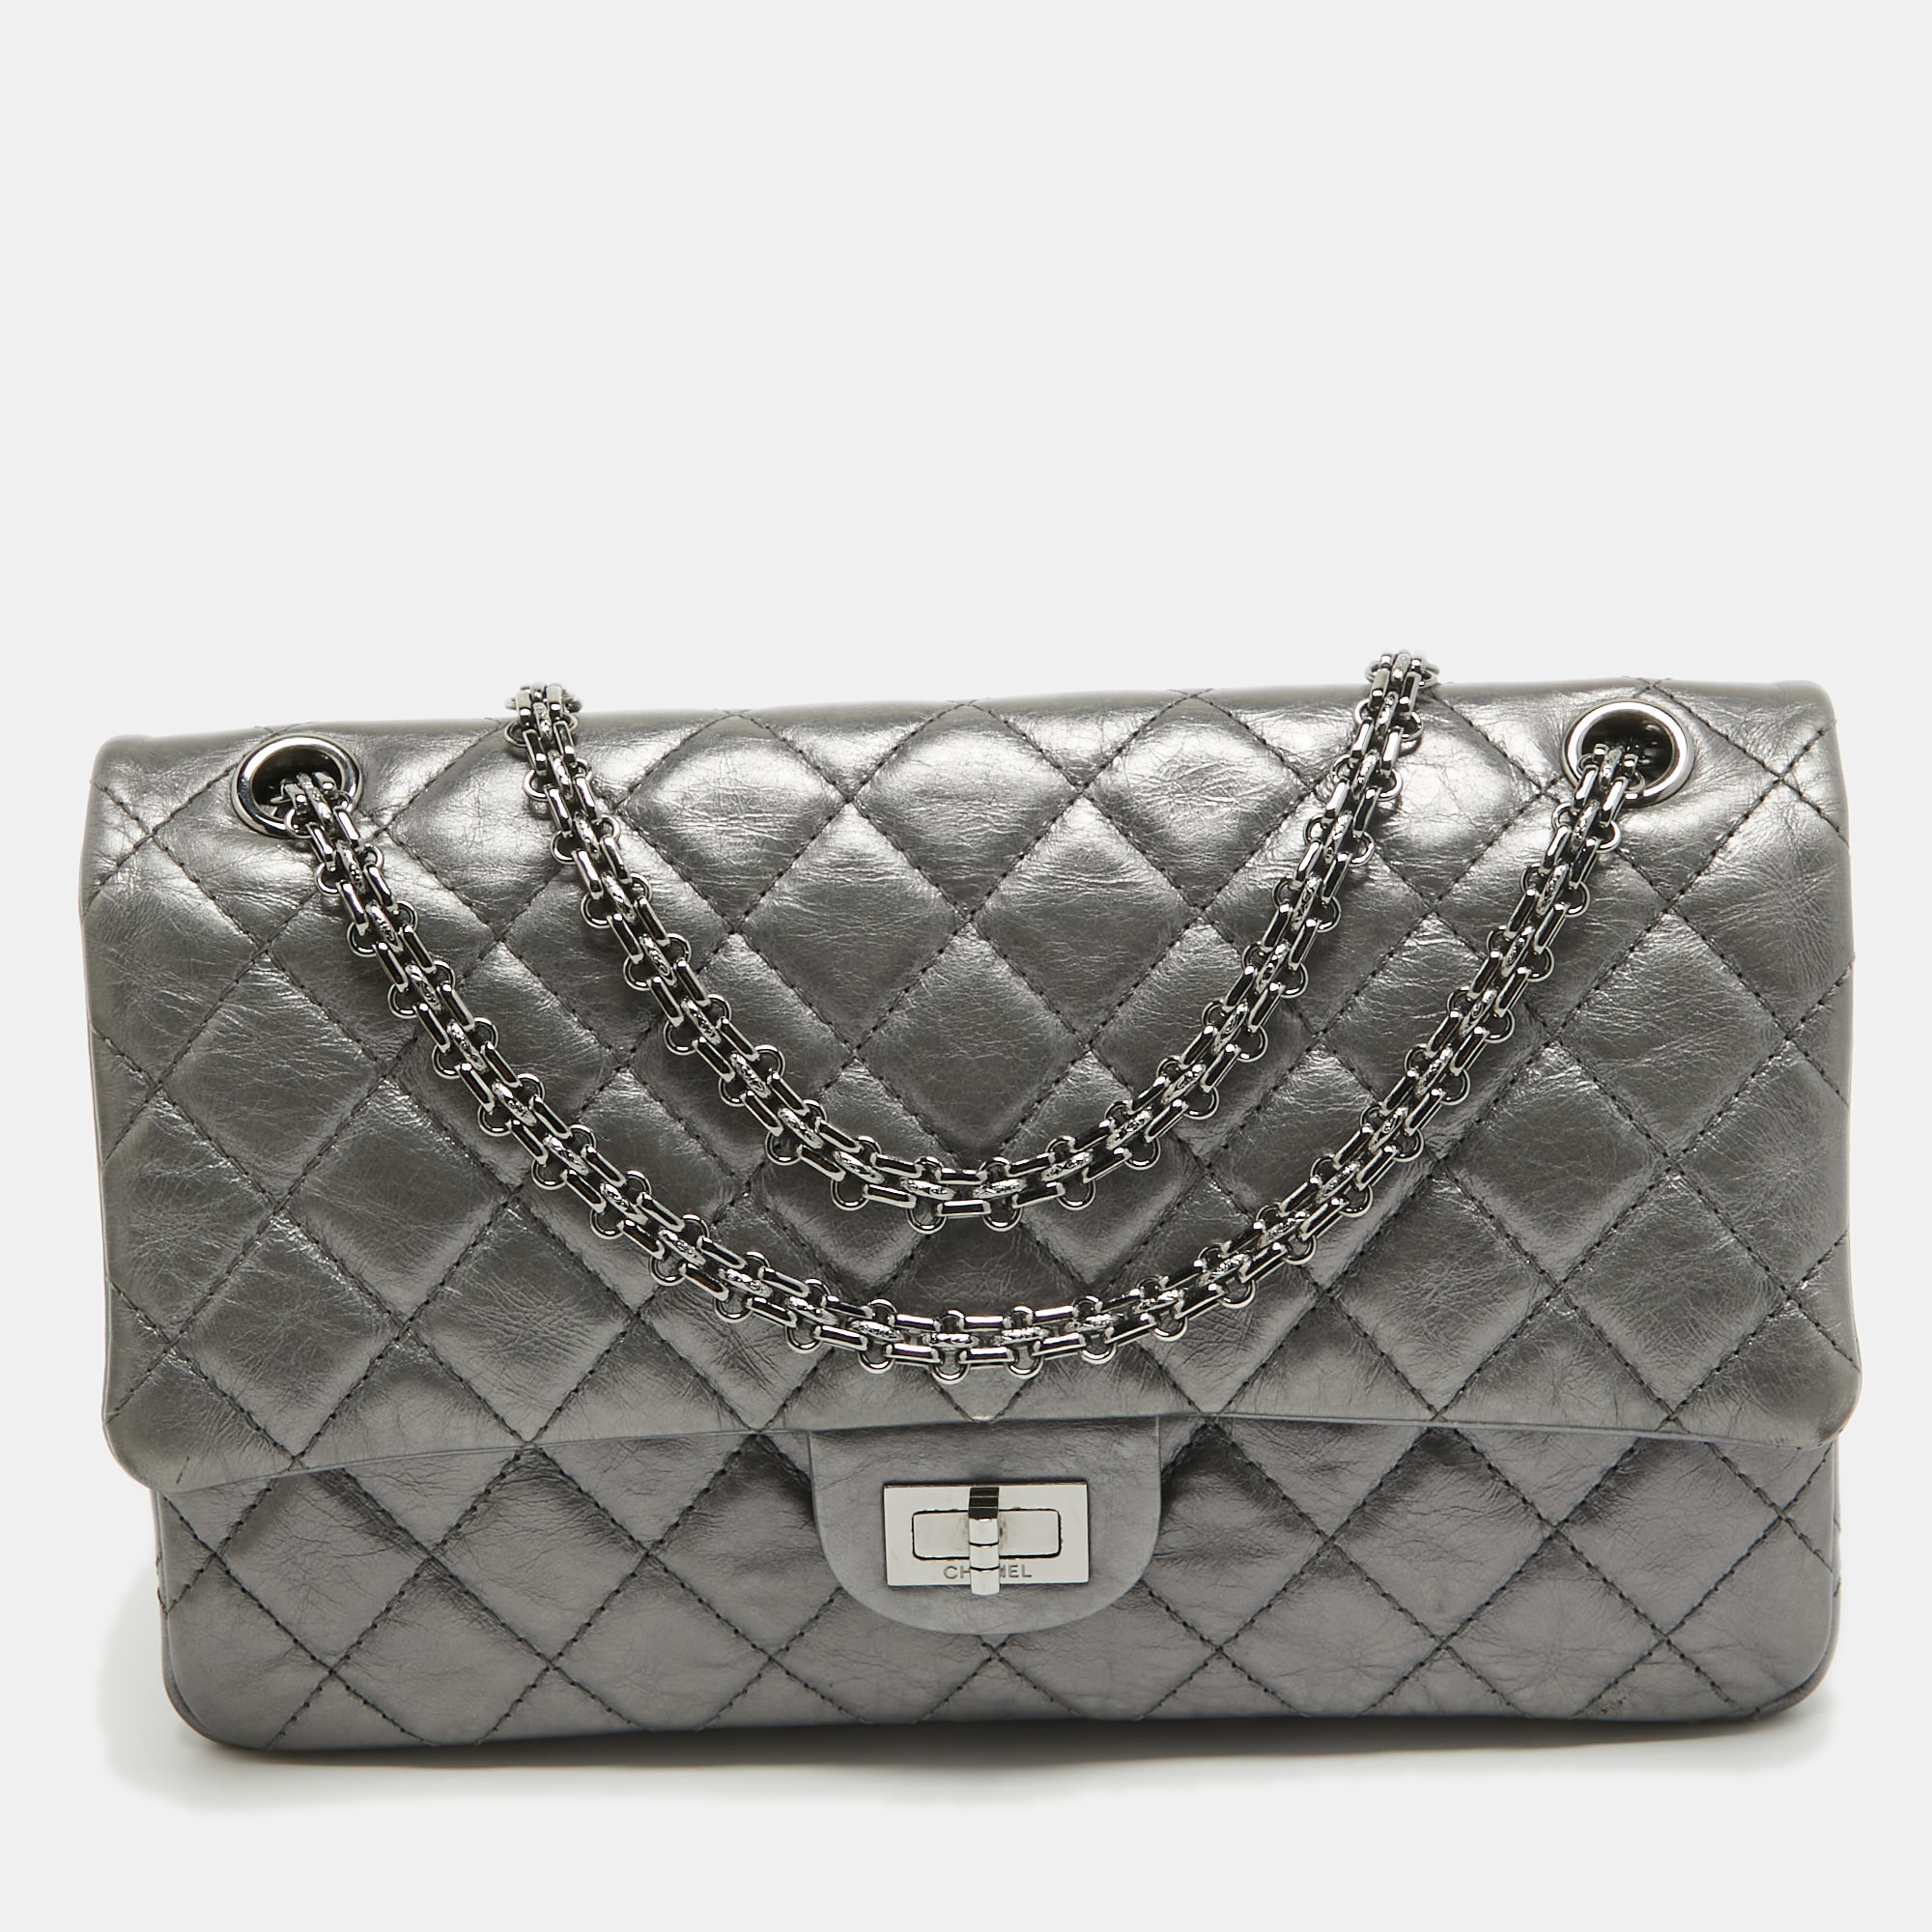 

Chanel Metallic Grey Quilted Leather 226 Reissue 2.55 Flap Bag